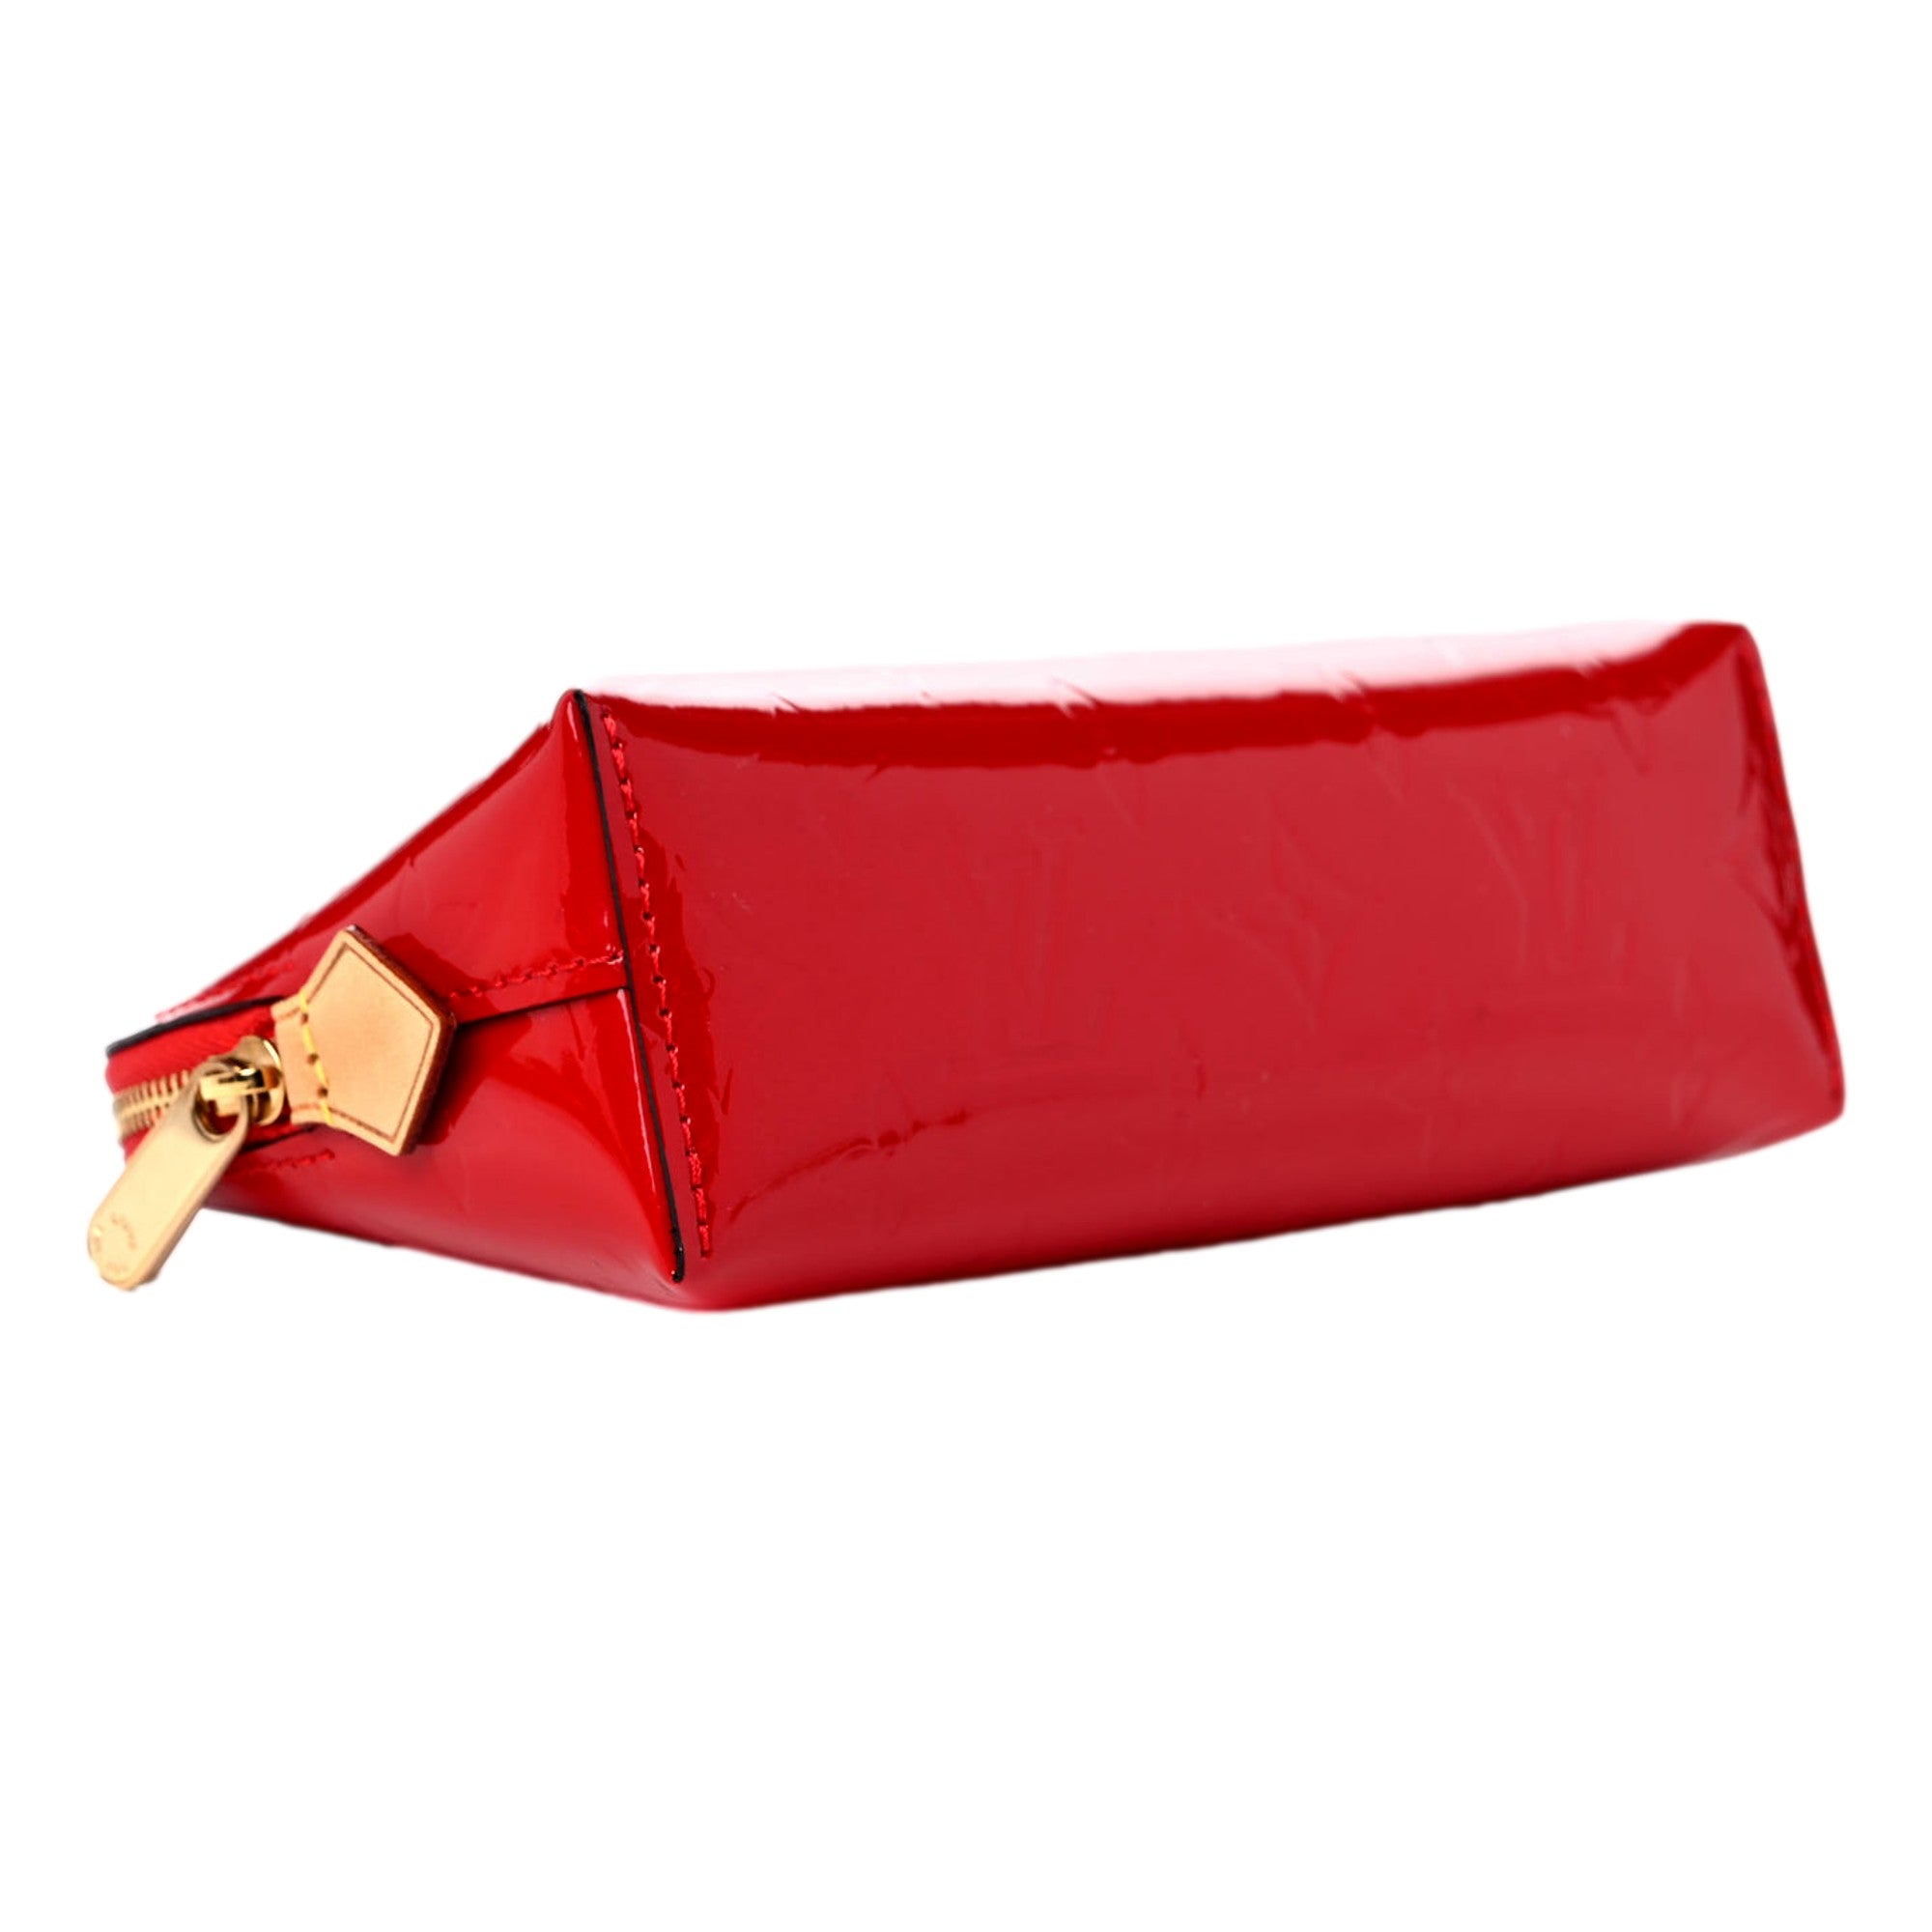 Louis Vuitton Vernis Cosmetic Pouch Cherry